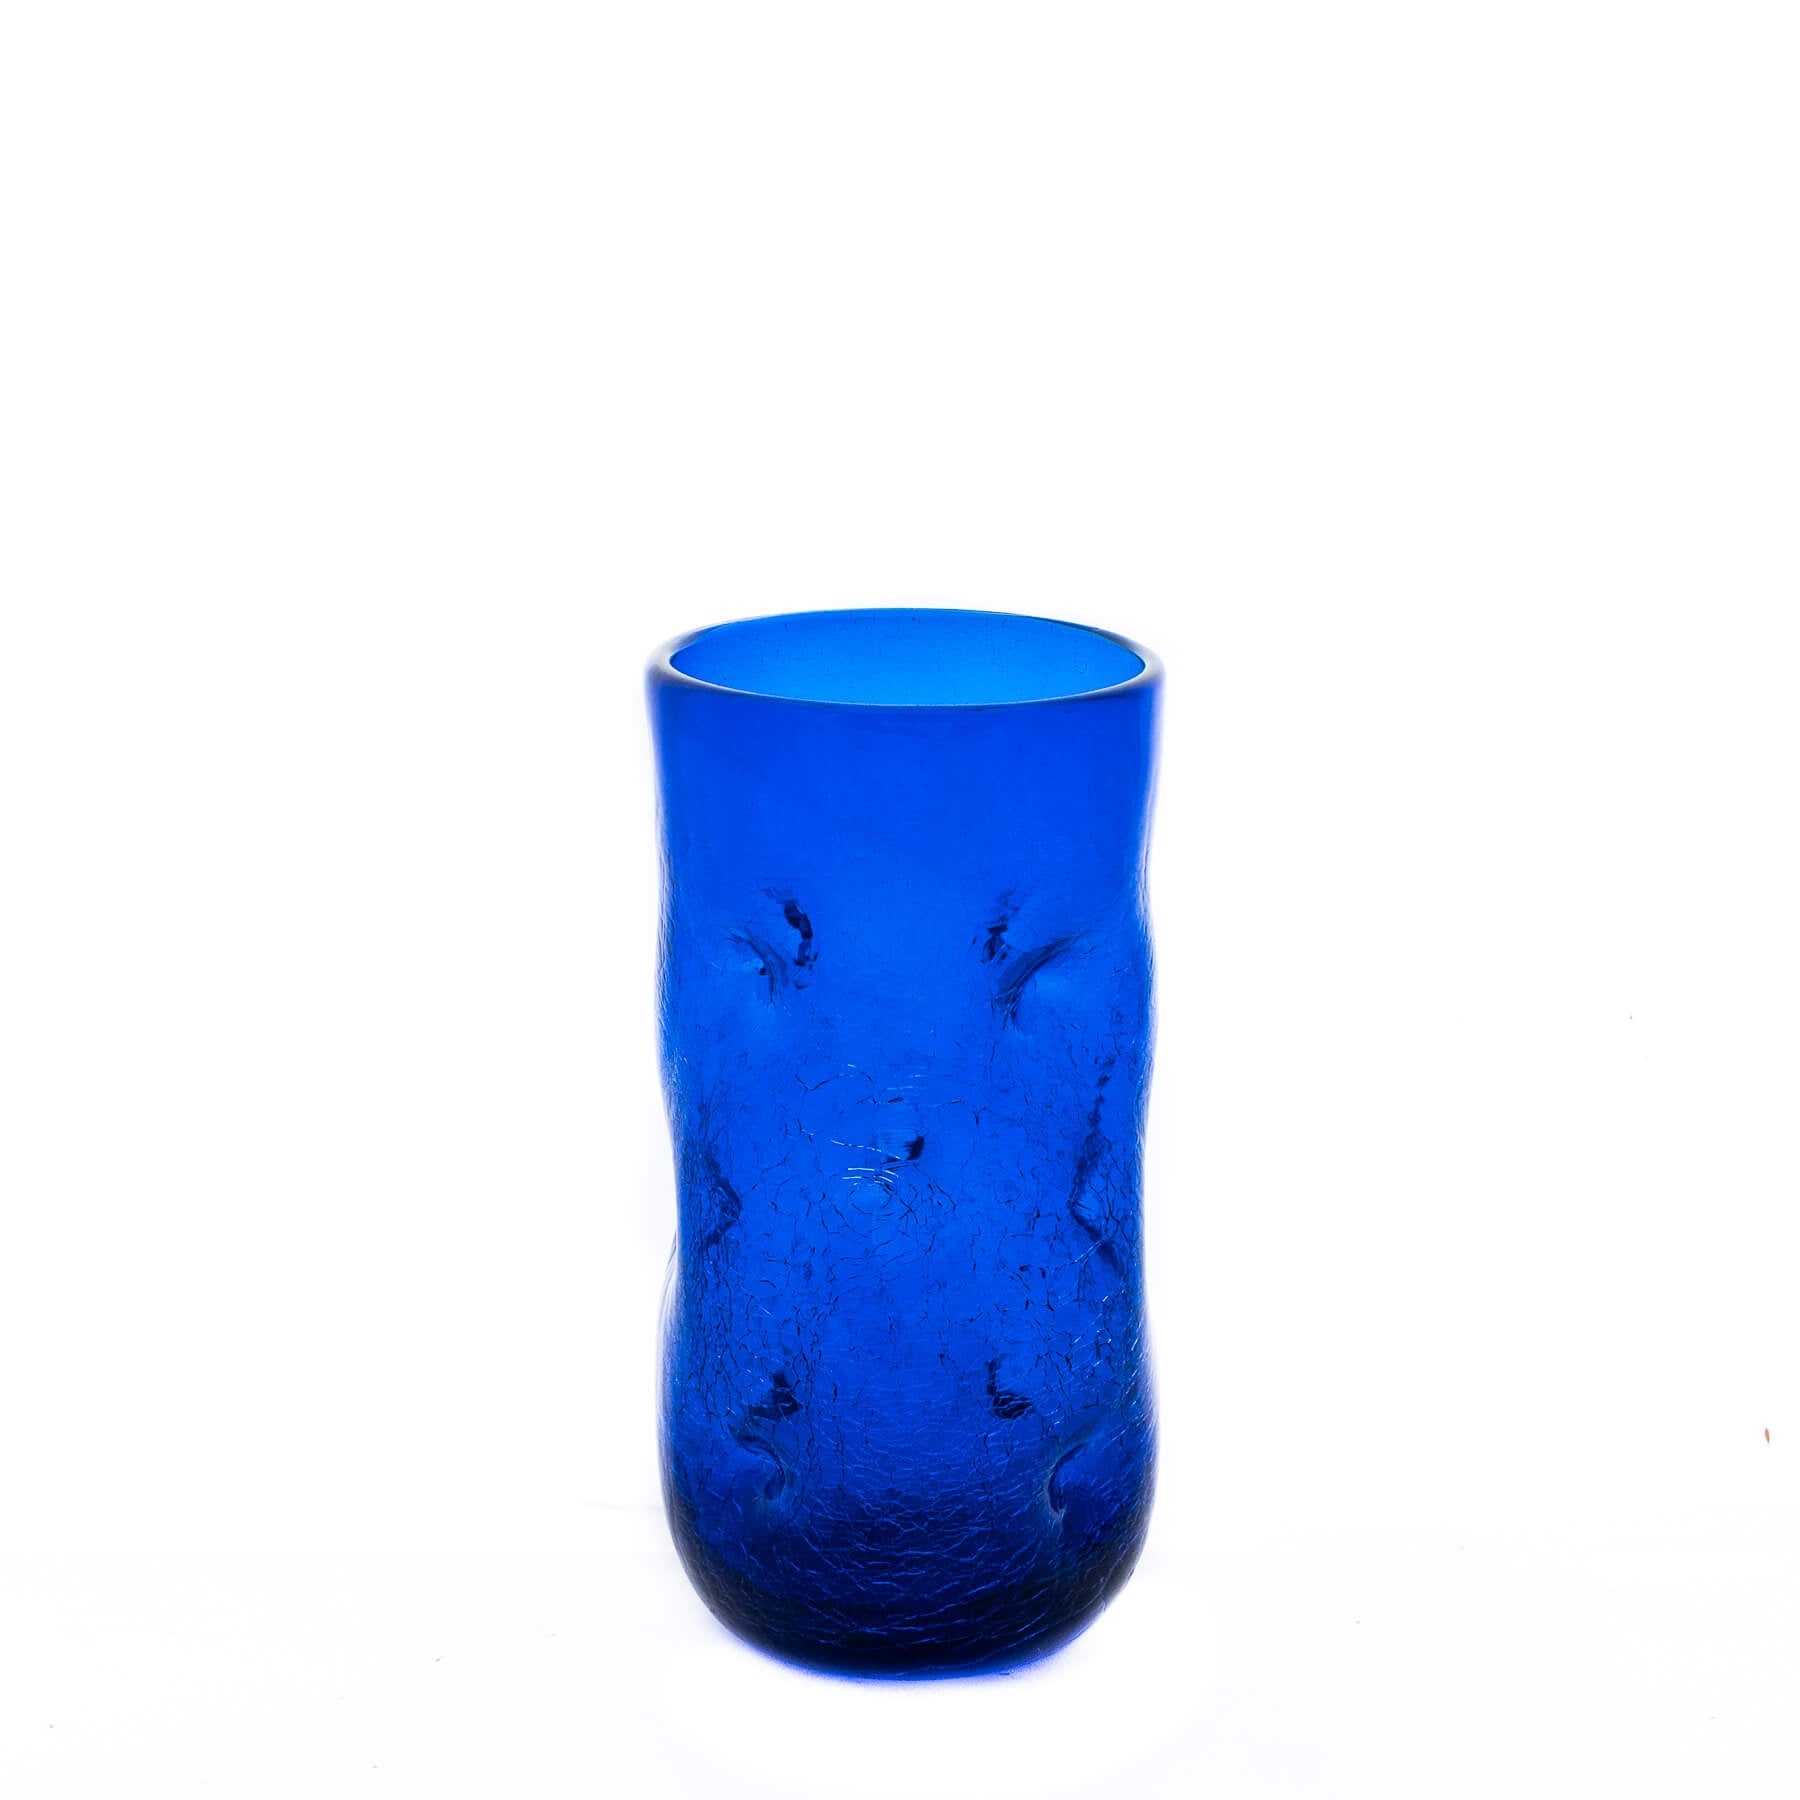 Product photo for Blenko 418LC Crackled Large Dimple Glass - Cobalt